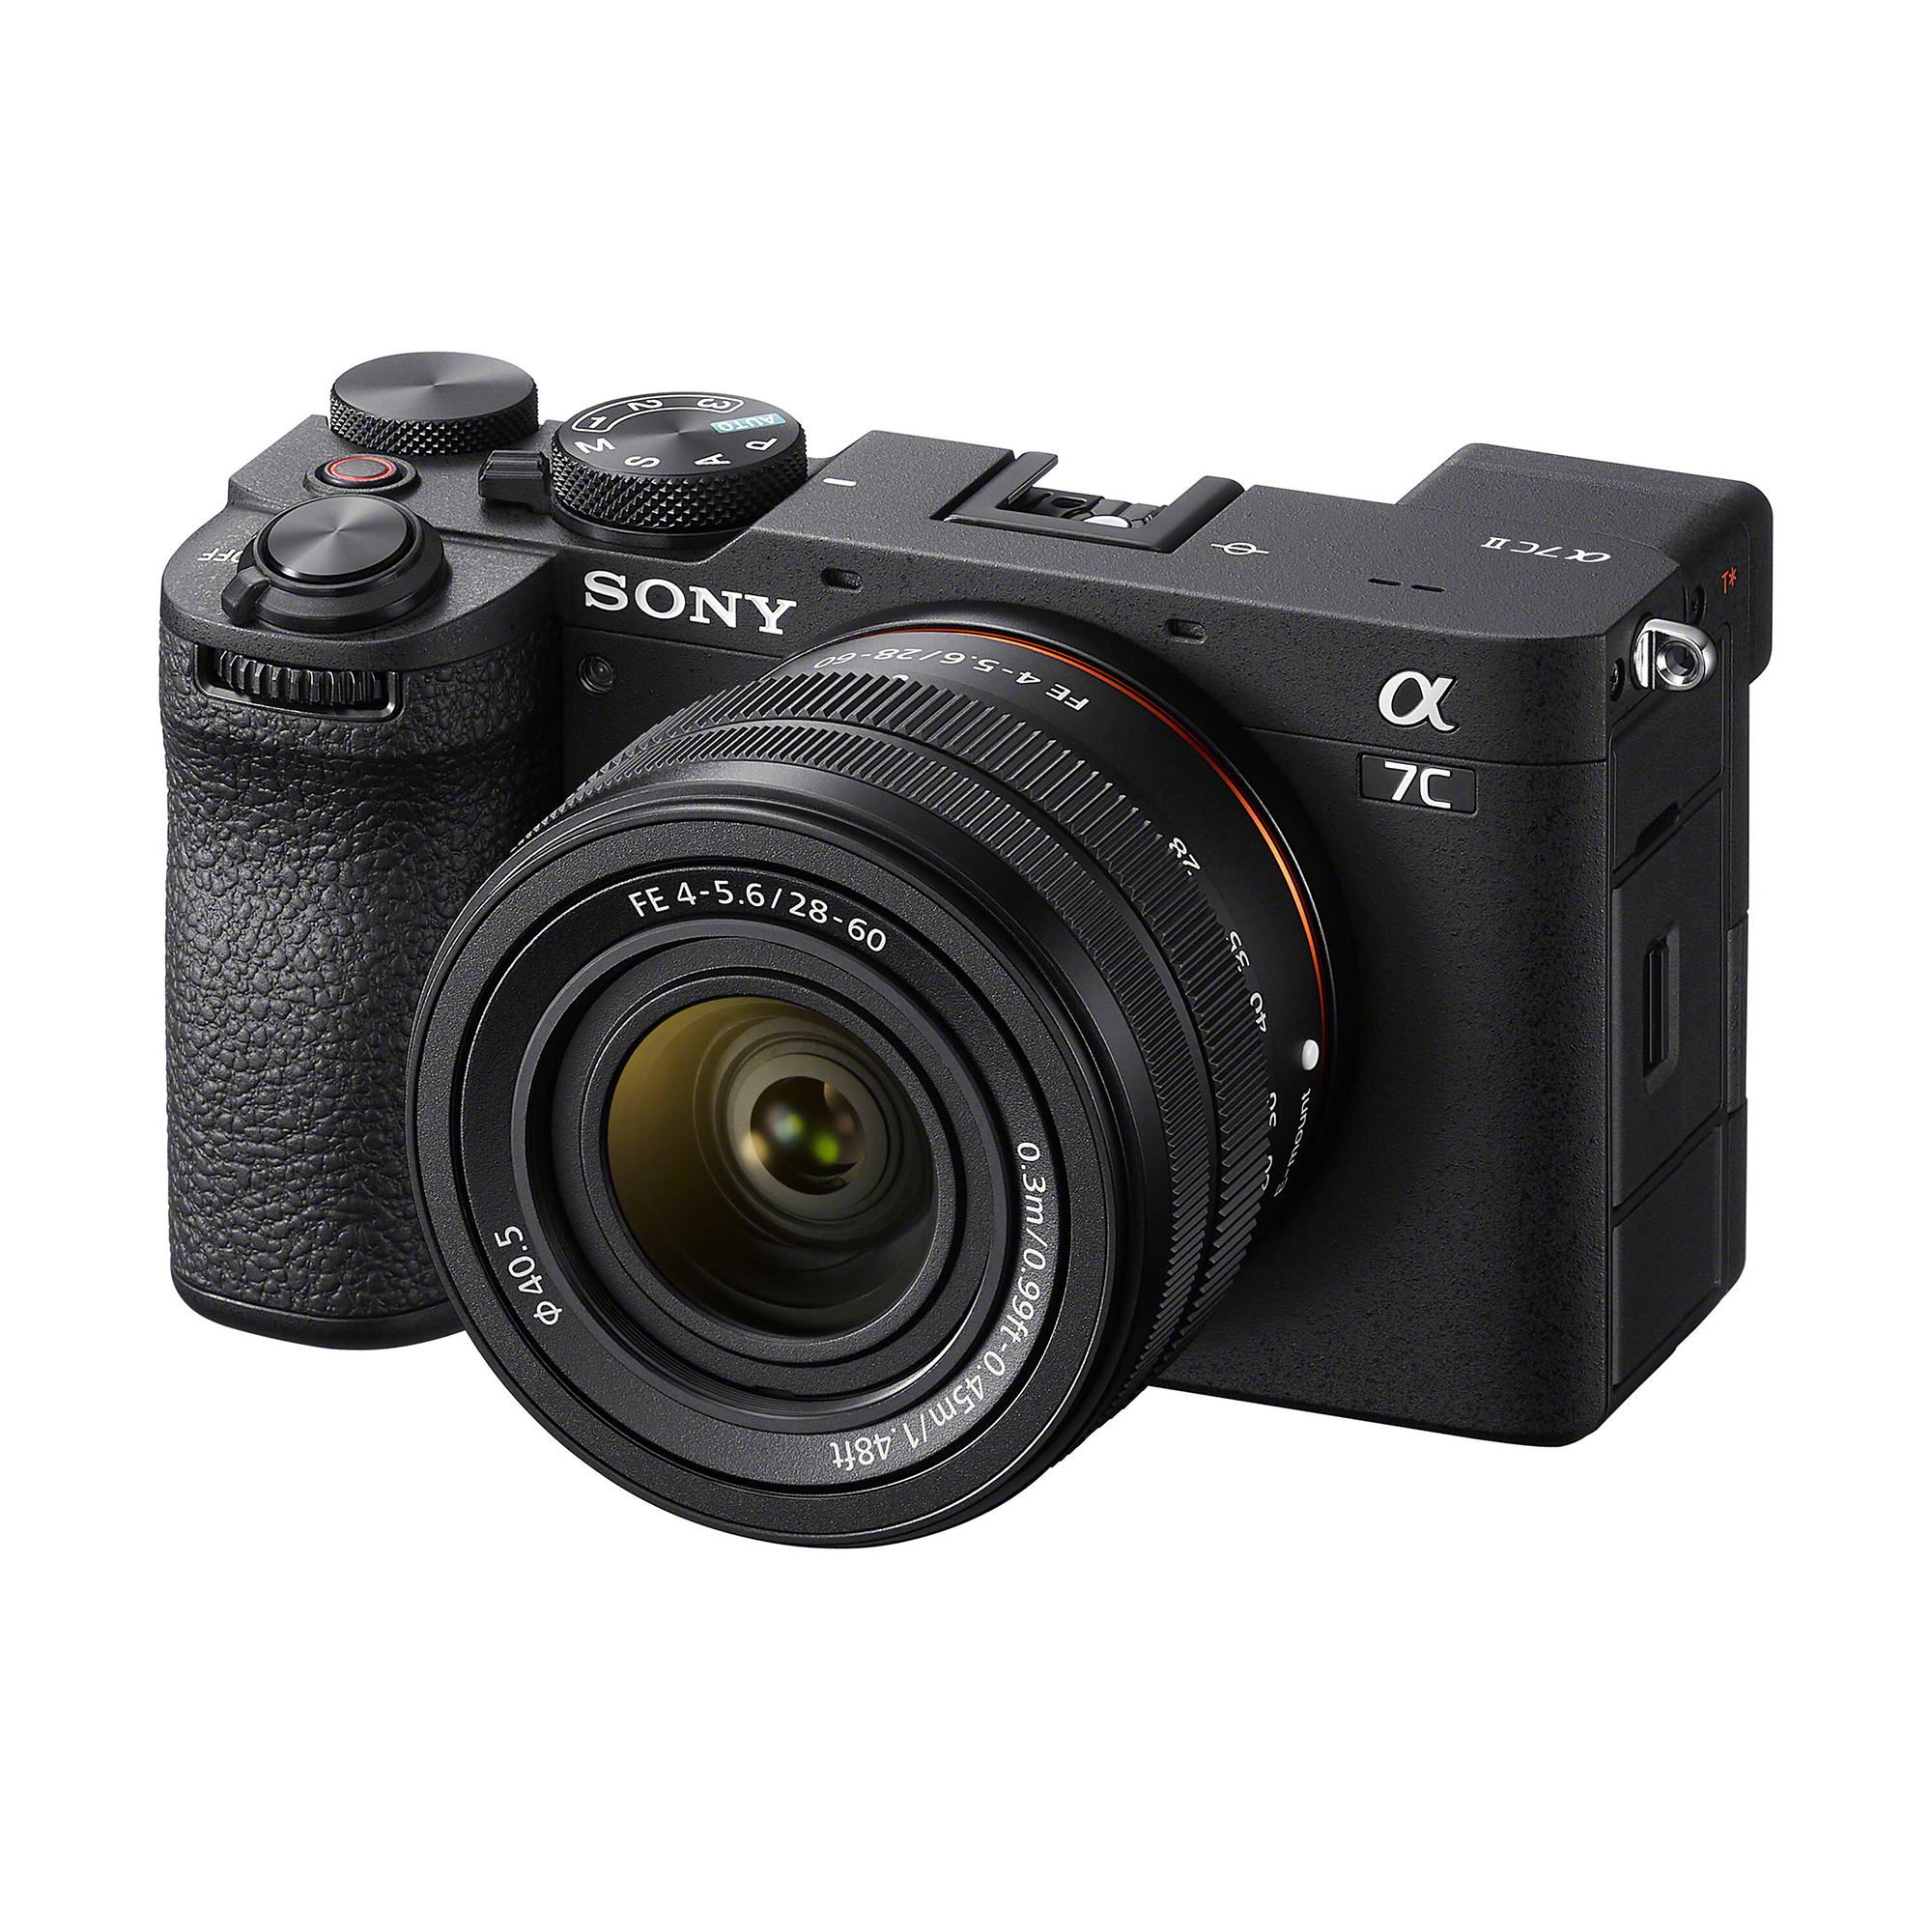 Sony Alpha a7C II Mirrorless Camera (Black) with 28-60mm lens